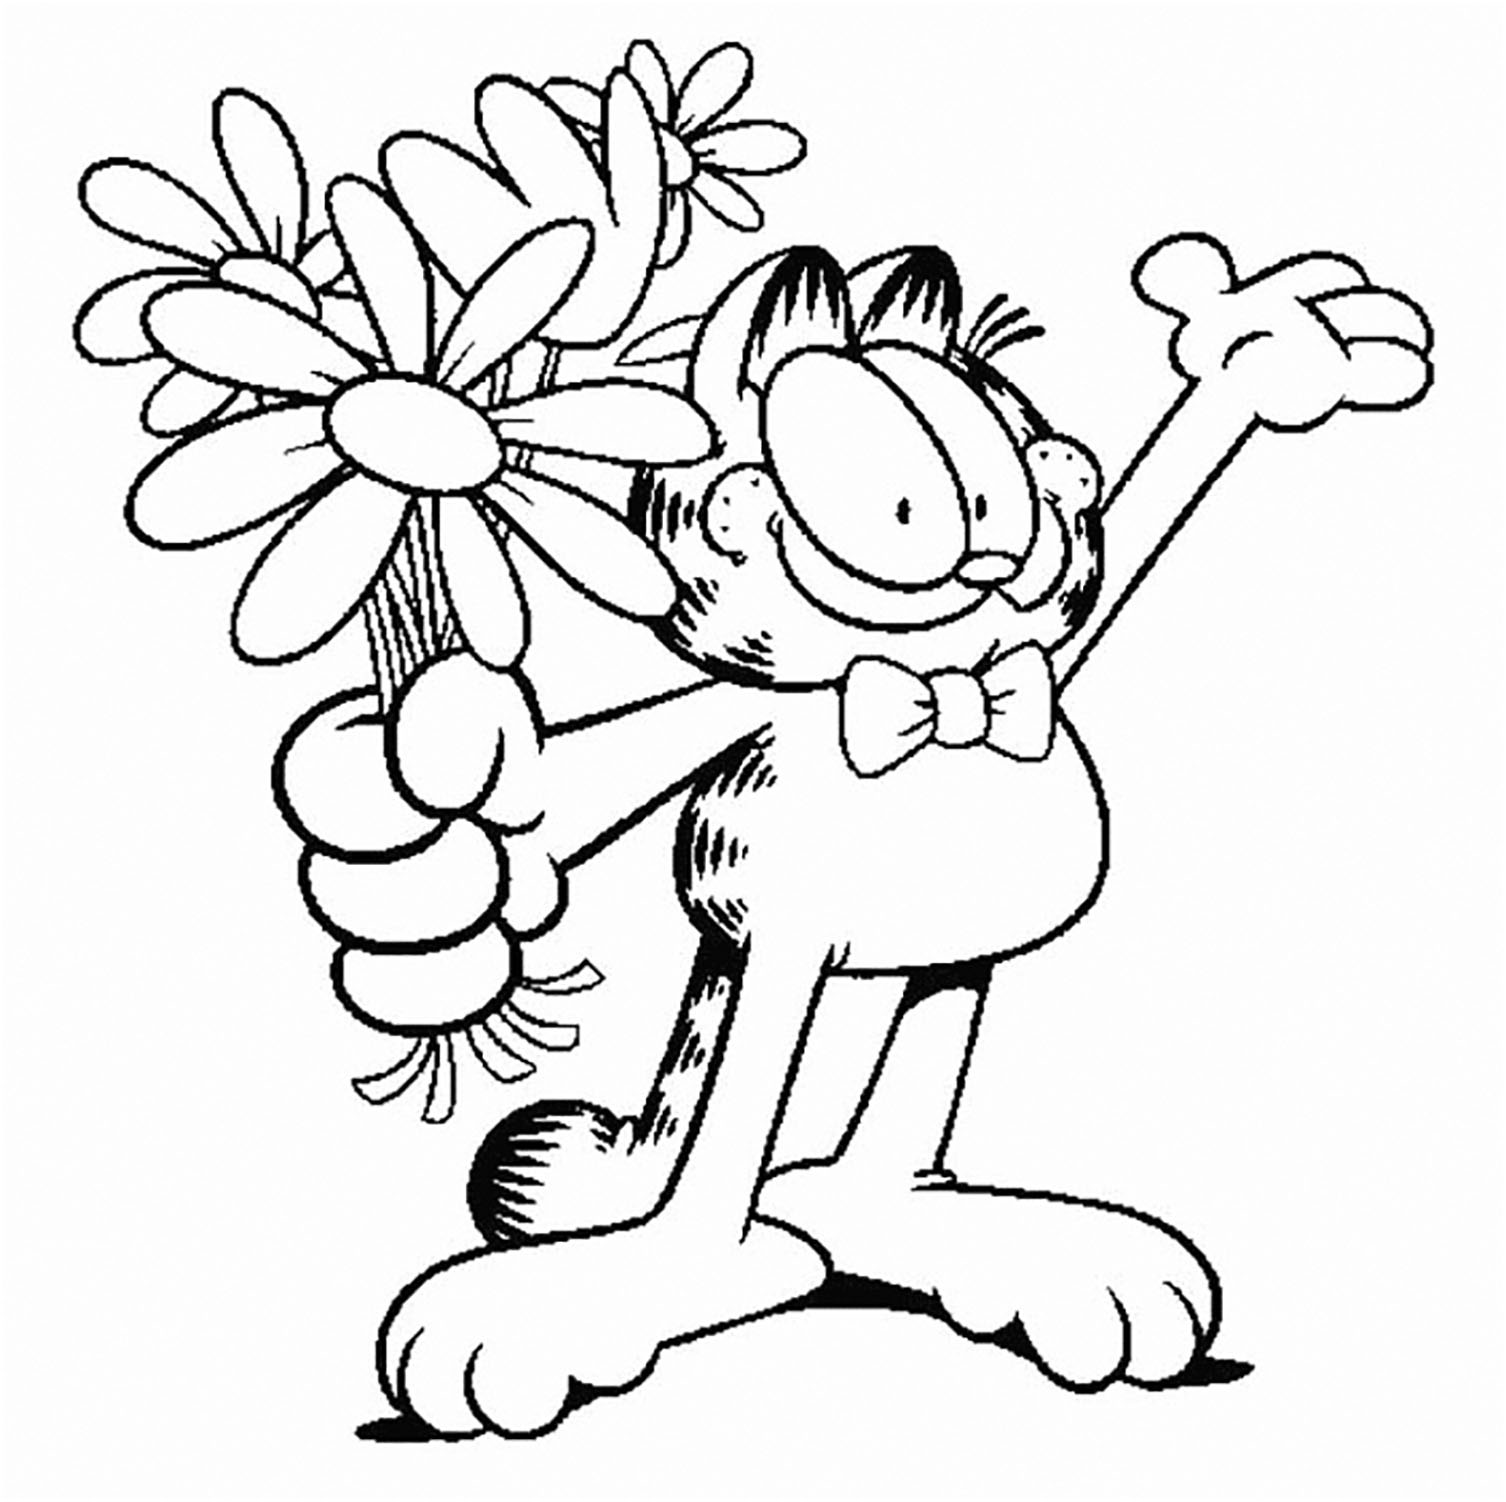 Easy coloring picture of Garfield for kids